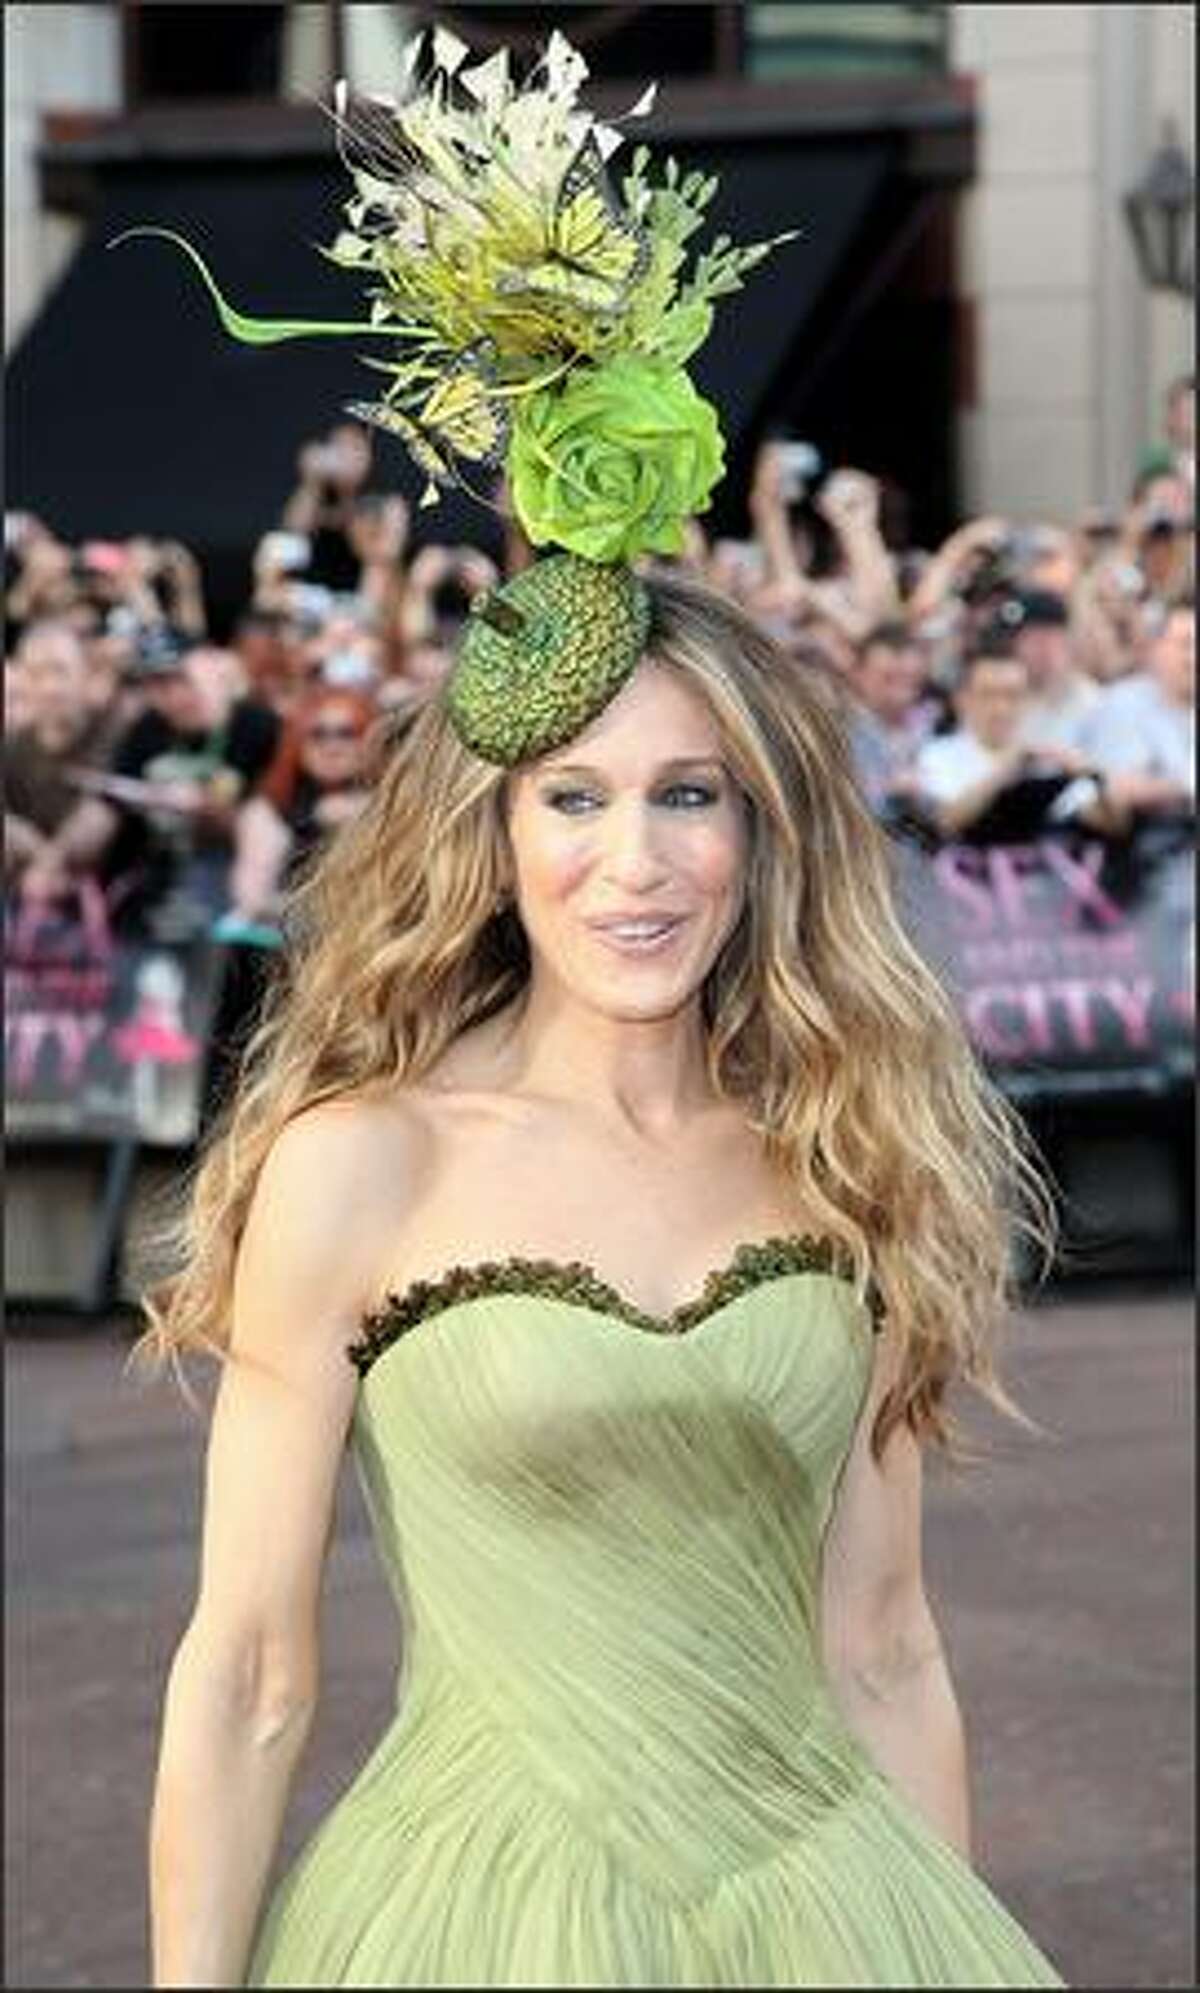 Actress Sarah Jessica Parker arrives at the world premiere of "Sex And The City" at the Odeon Leicester Square on Monday in London.